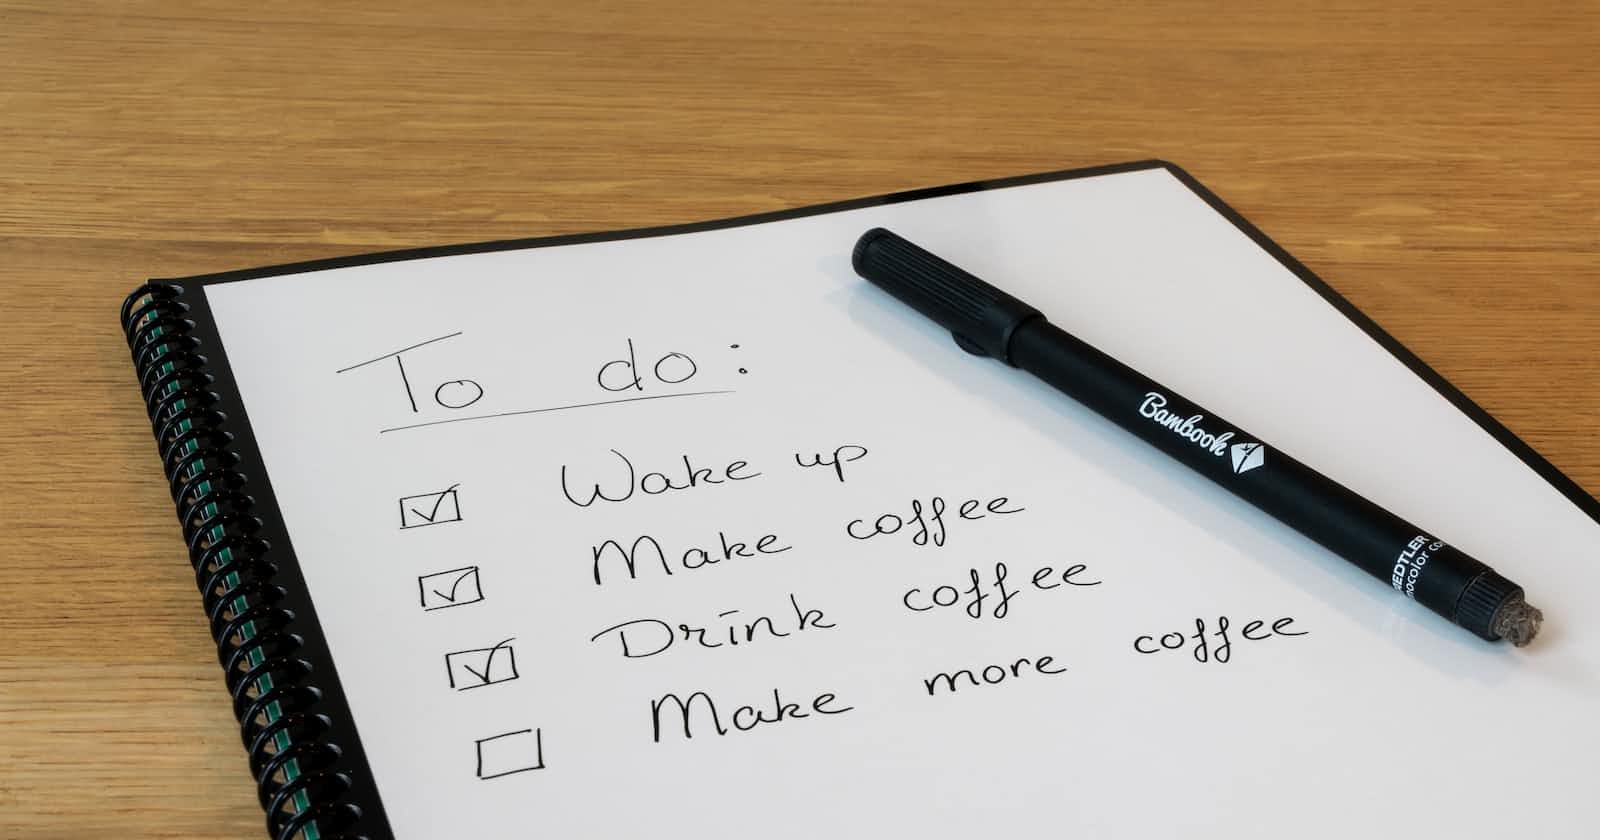 How to create a to-do list system that you can stick to?